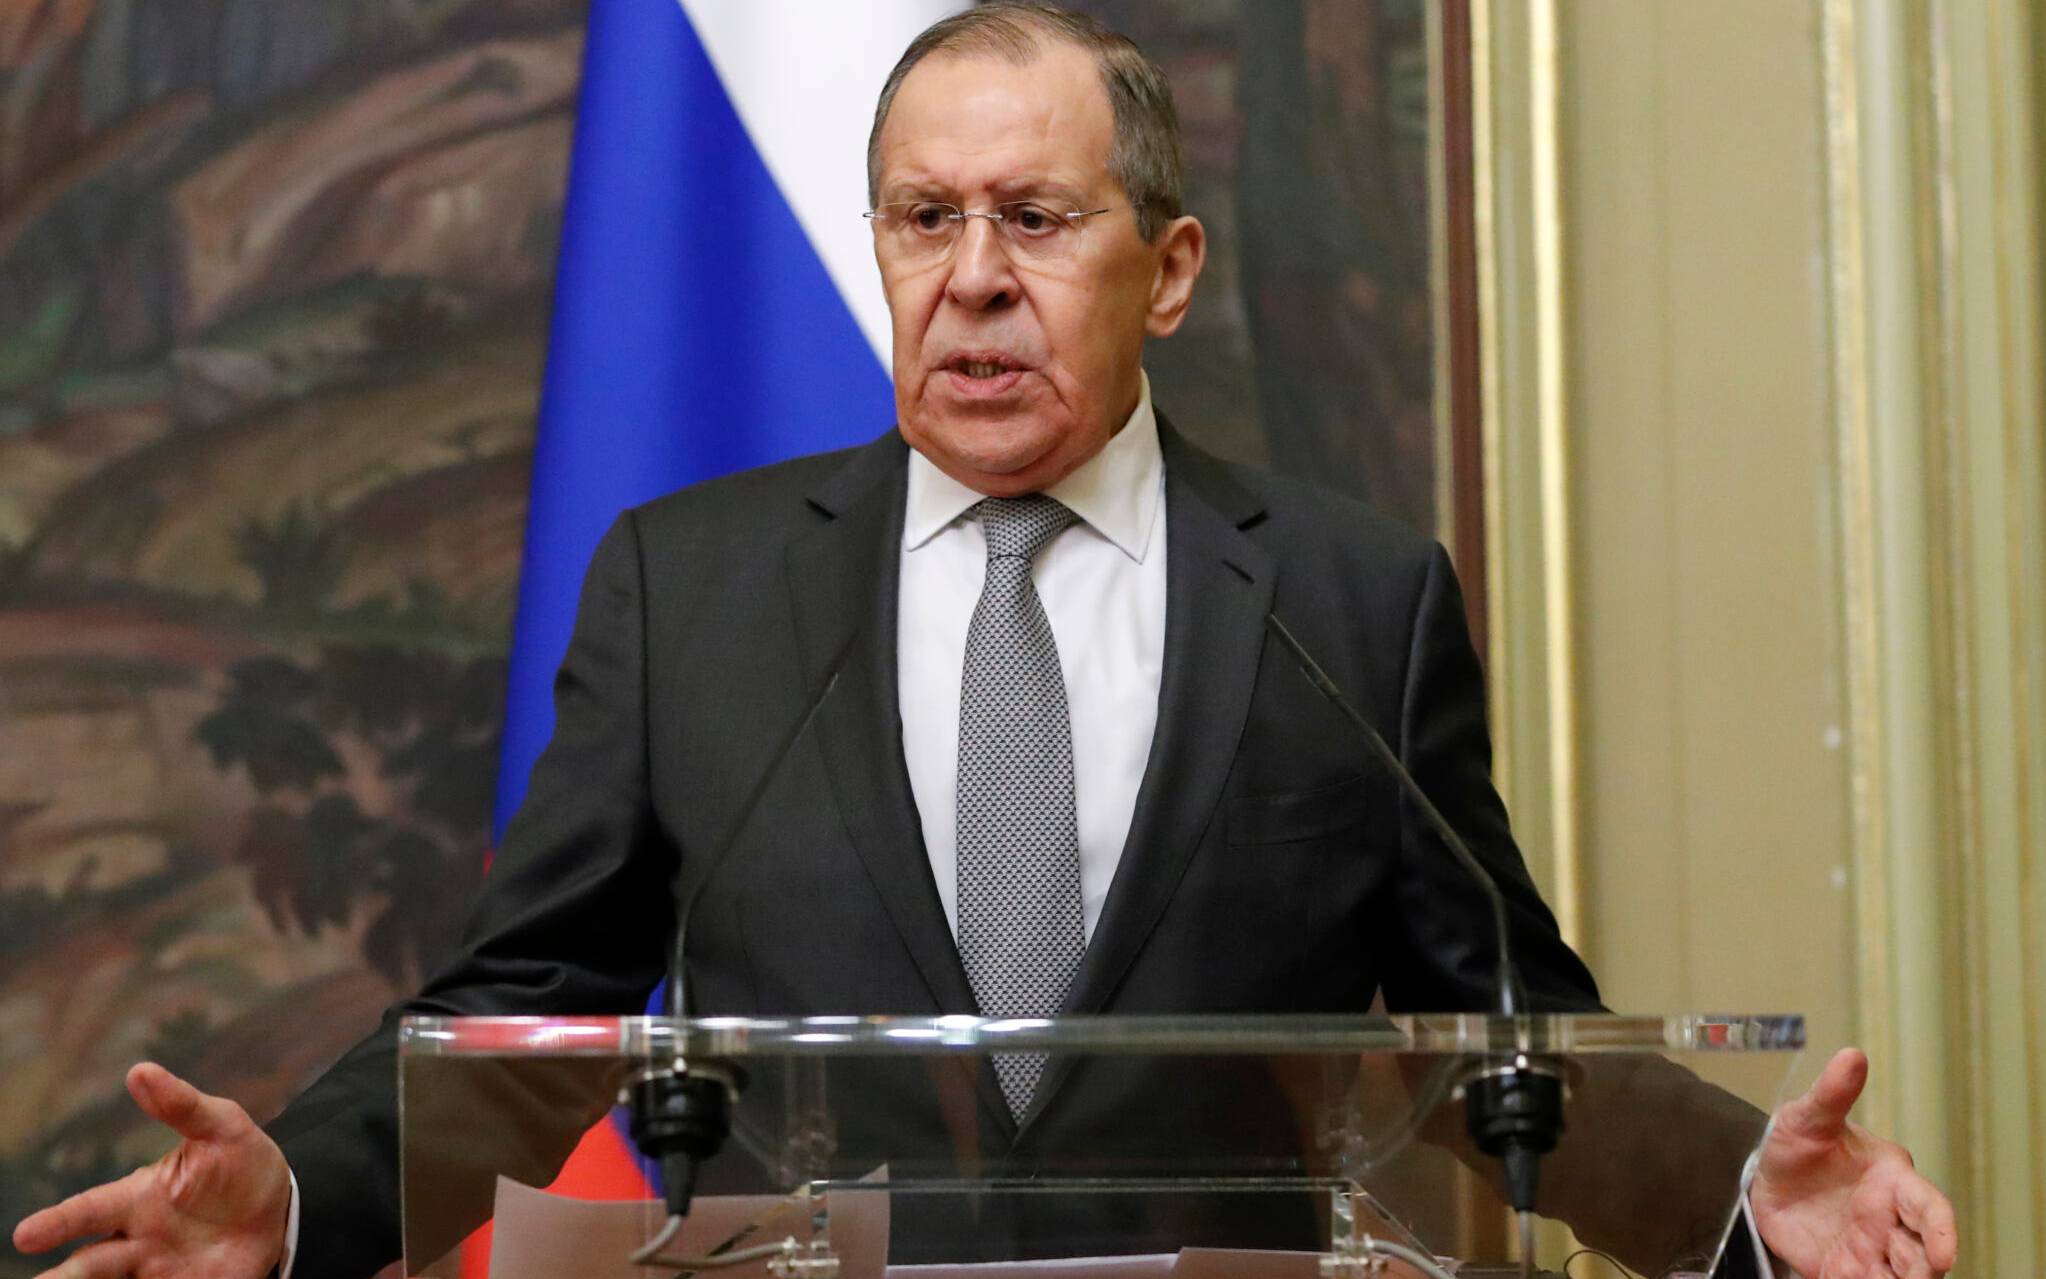 Russian Foreign Minister Sergei Lavrov gestures during a press conference following talks with his Italian counterpart in Moscow, on February 17, 2022. (Photo by SHAMIL ZHUMATOV / POOL / AFP)